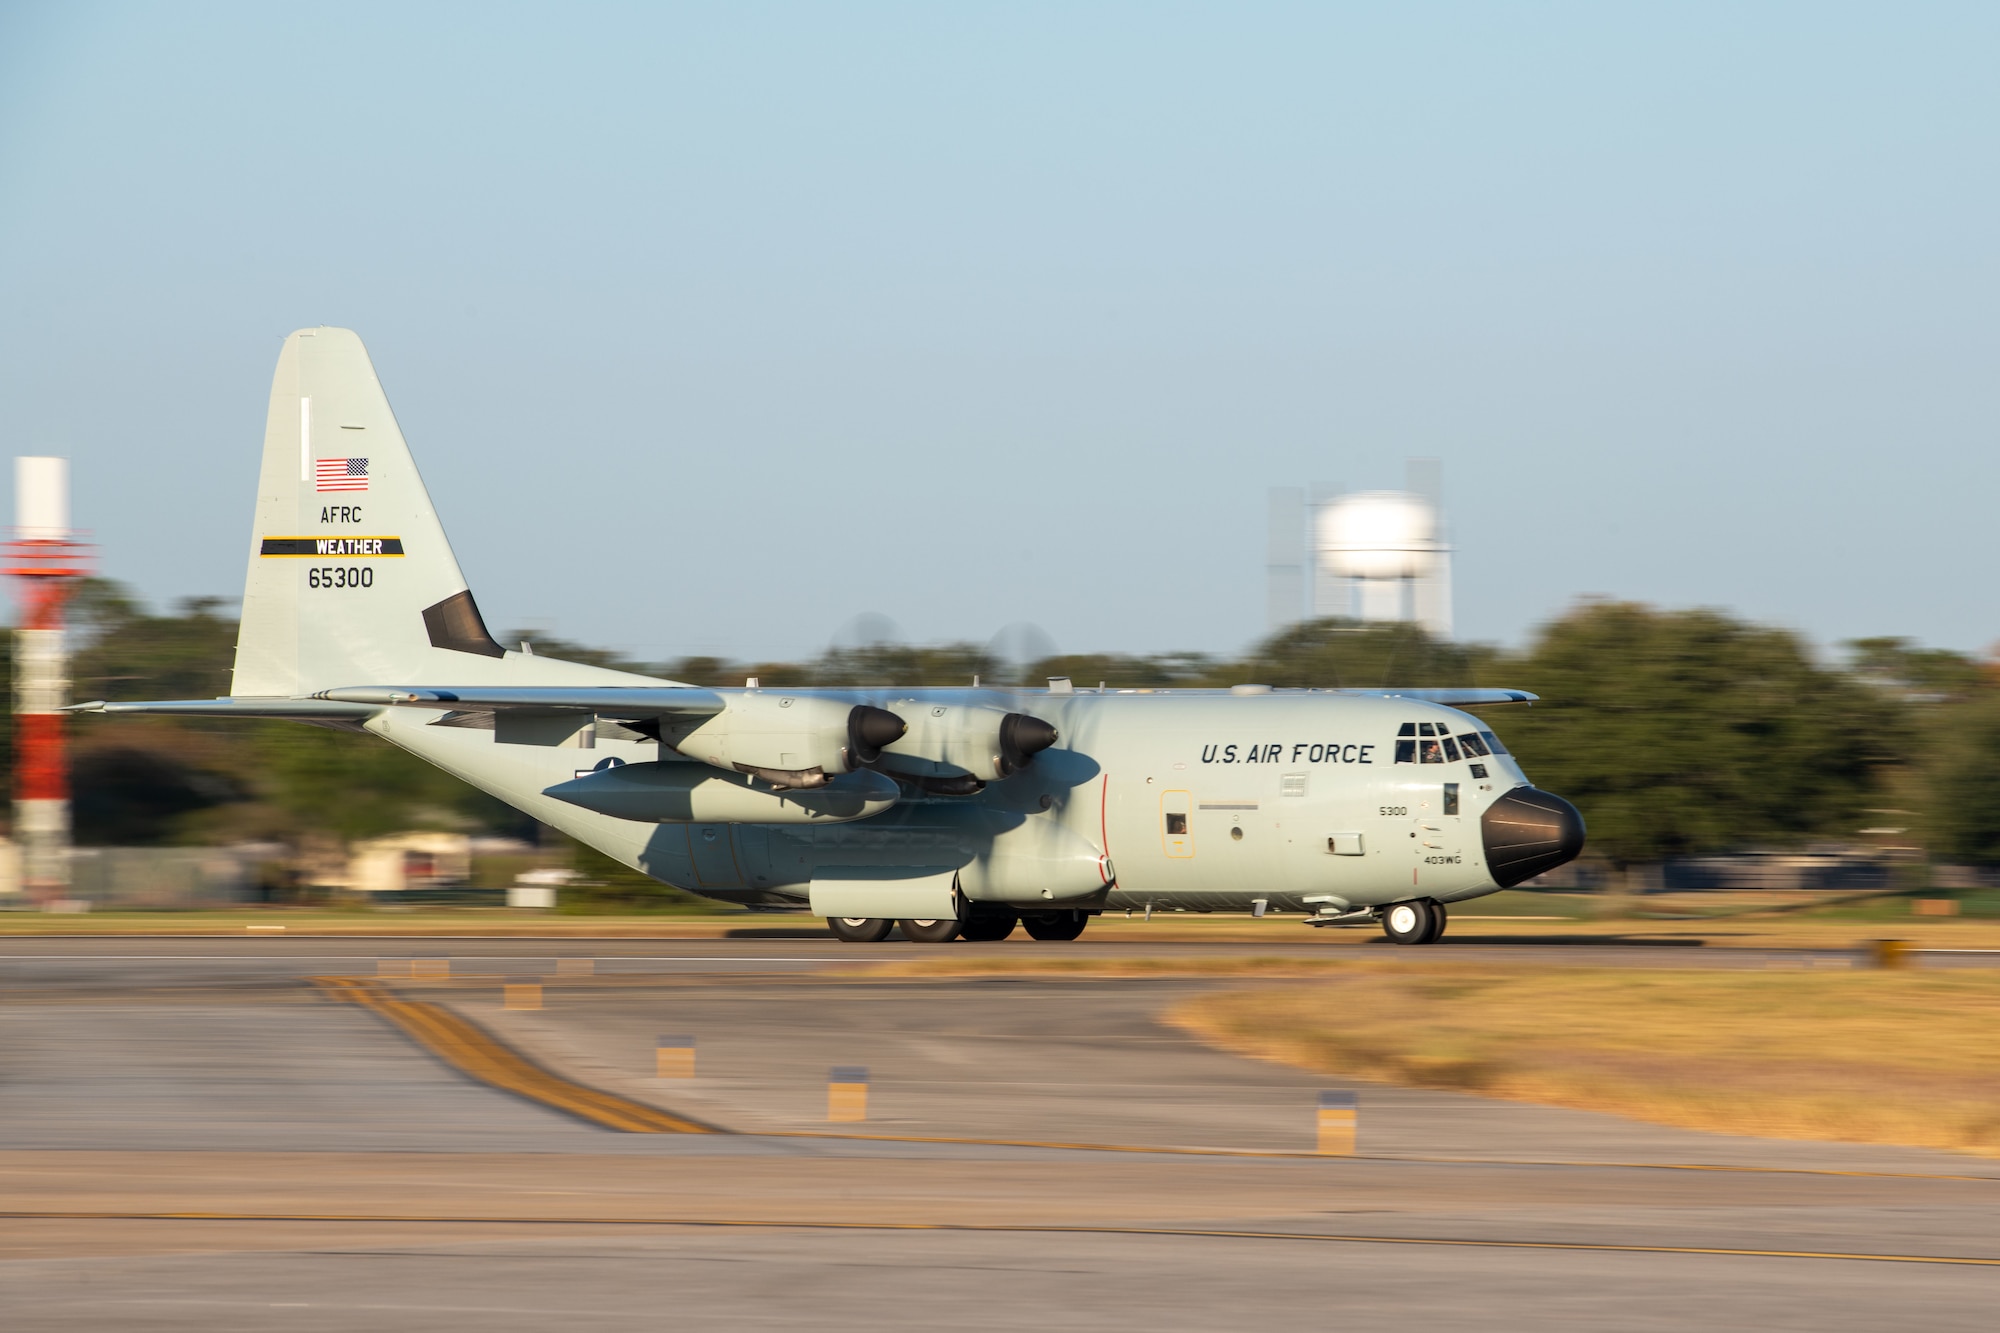 A WC-130J begins to take off